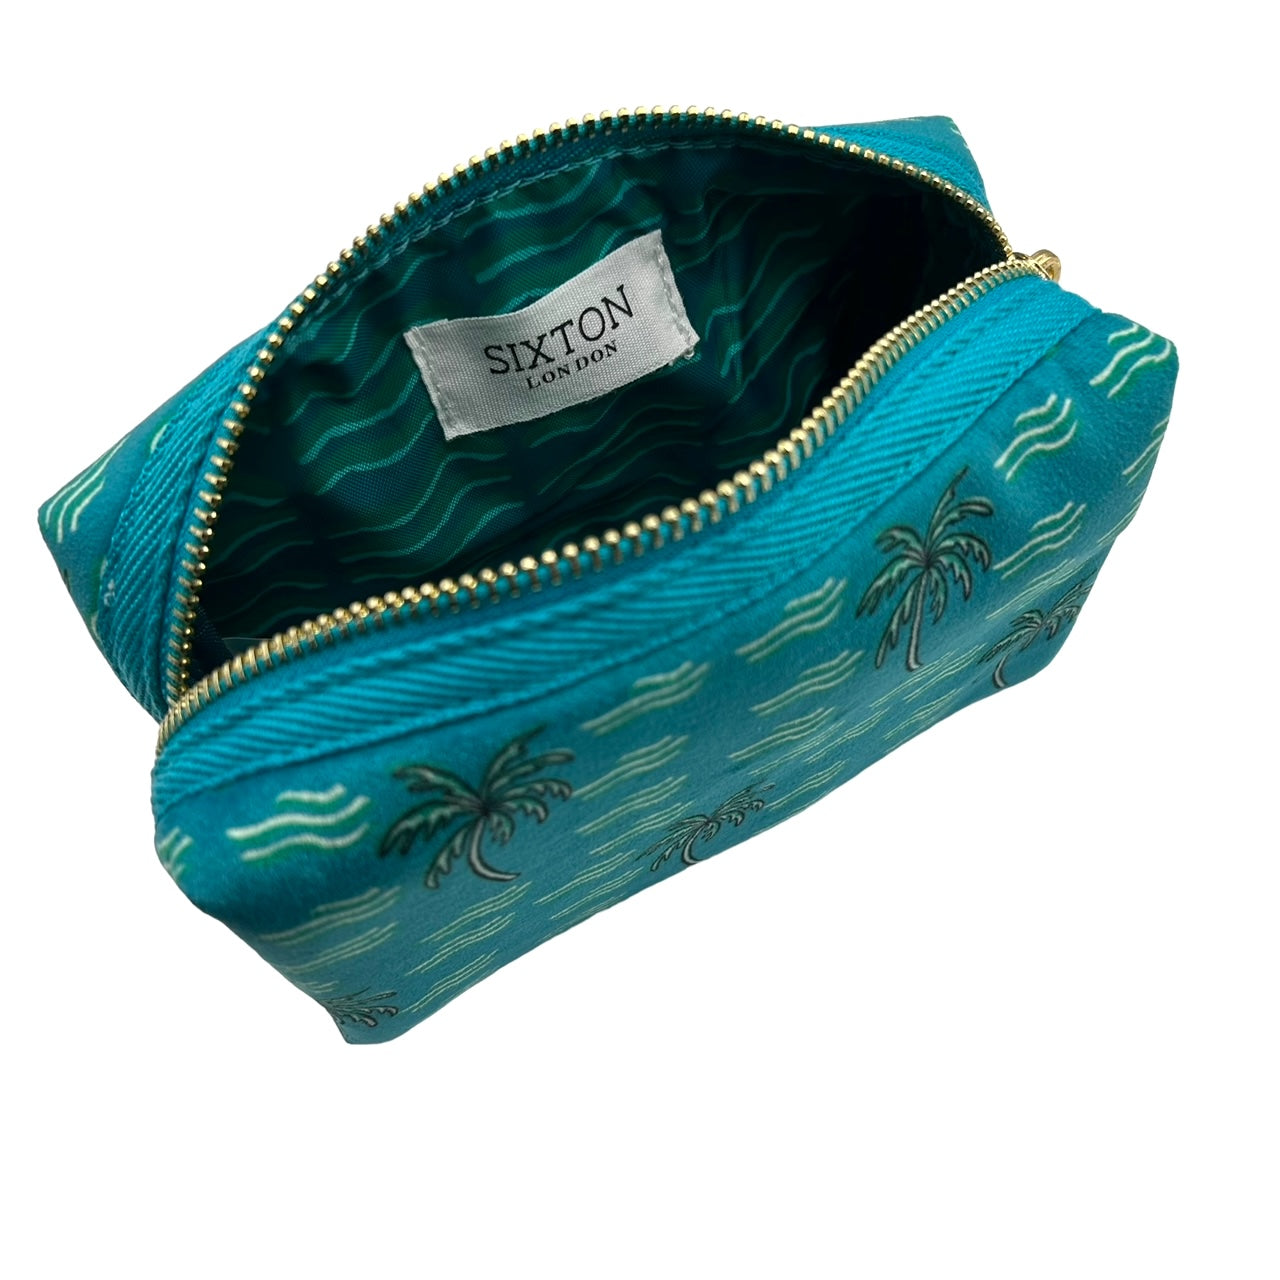 Teal palm tree make-up bag - recycled velvet, large and small